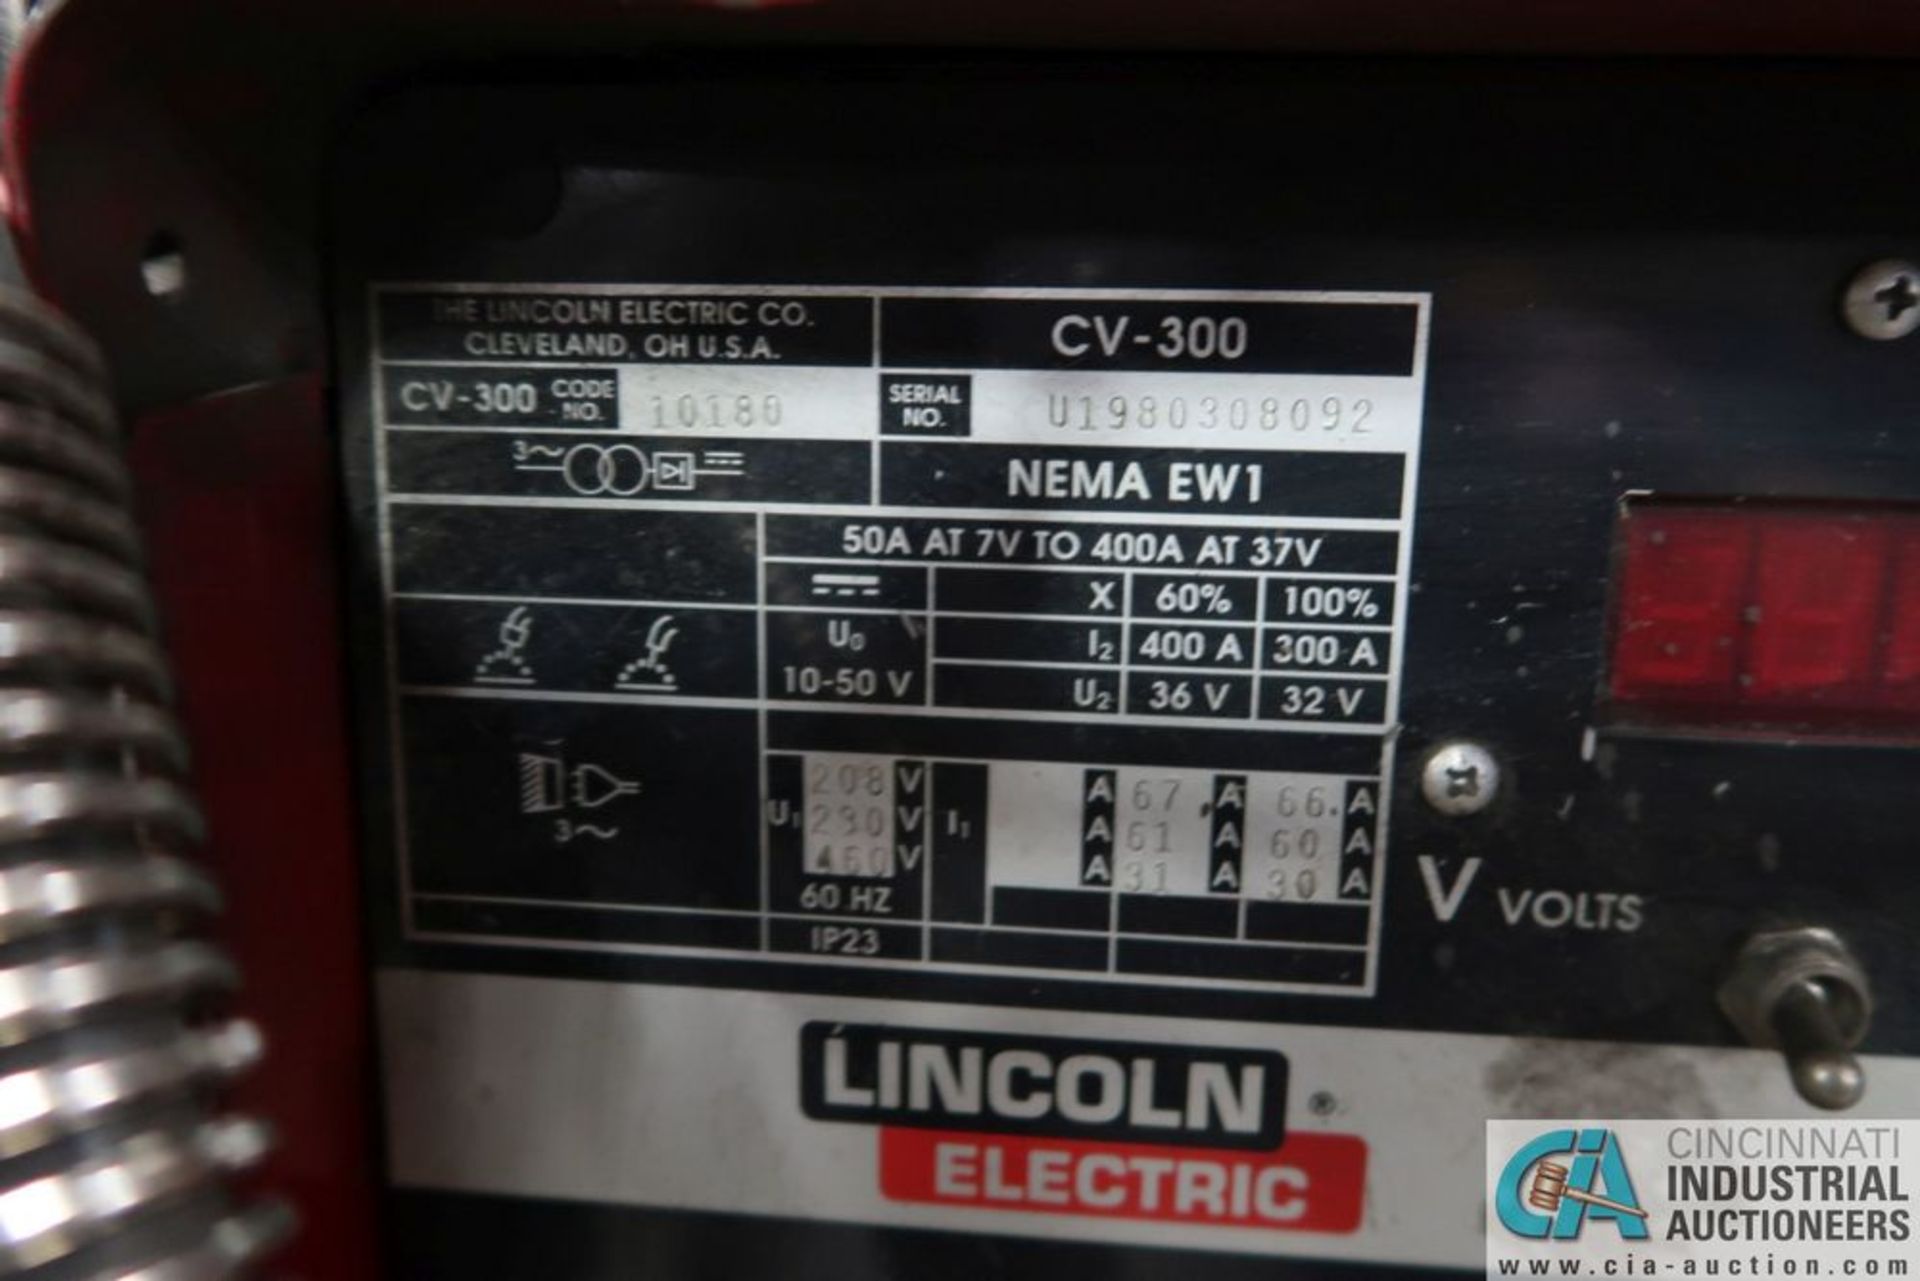 300 AMP LINCOLN CV-300 WELDER; S/N U1980308092, WITH LINCOLN LN-7 WIRE FEED - Image 4 of 7